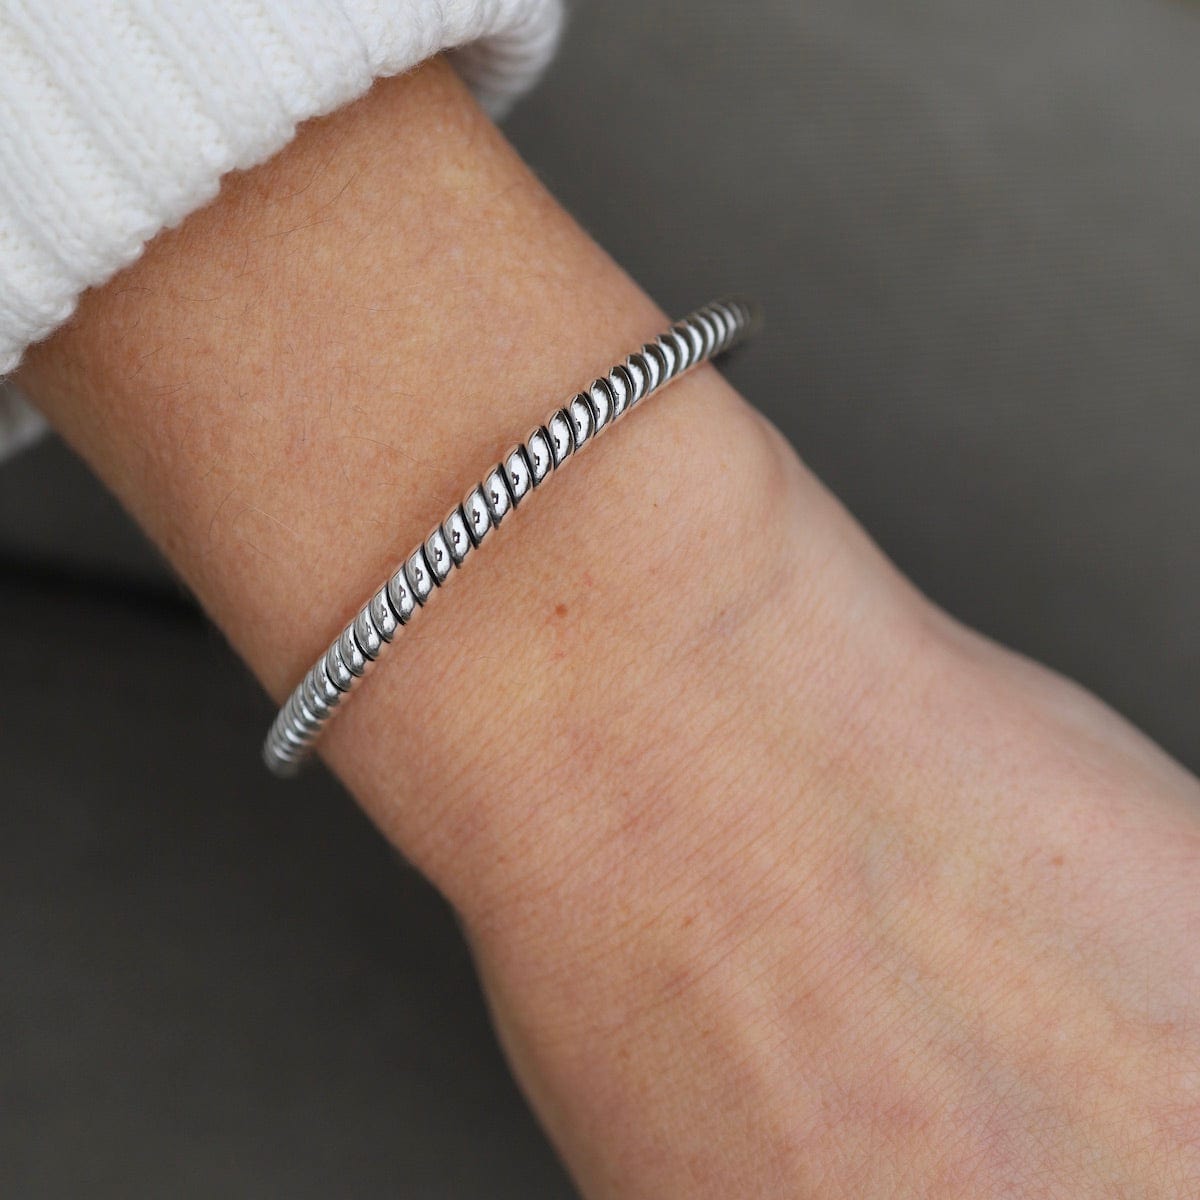 BRC Heavy Twisted Sterling Silver Cuff with Curled Ends